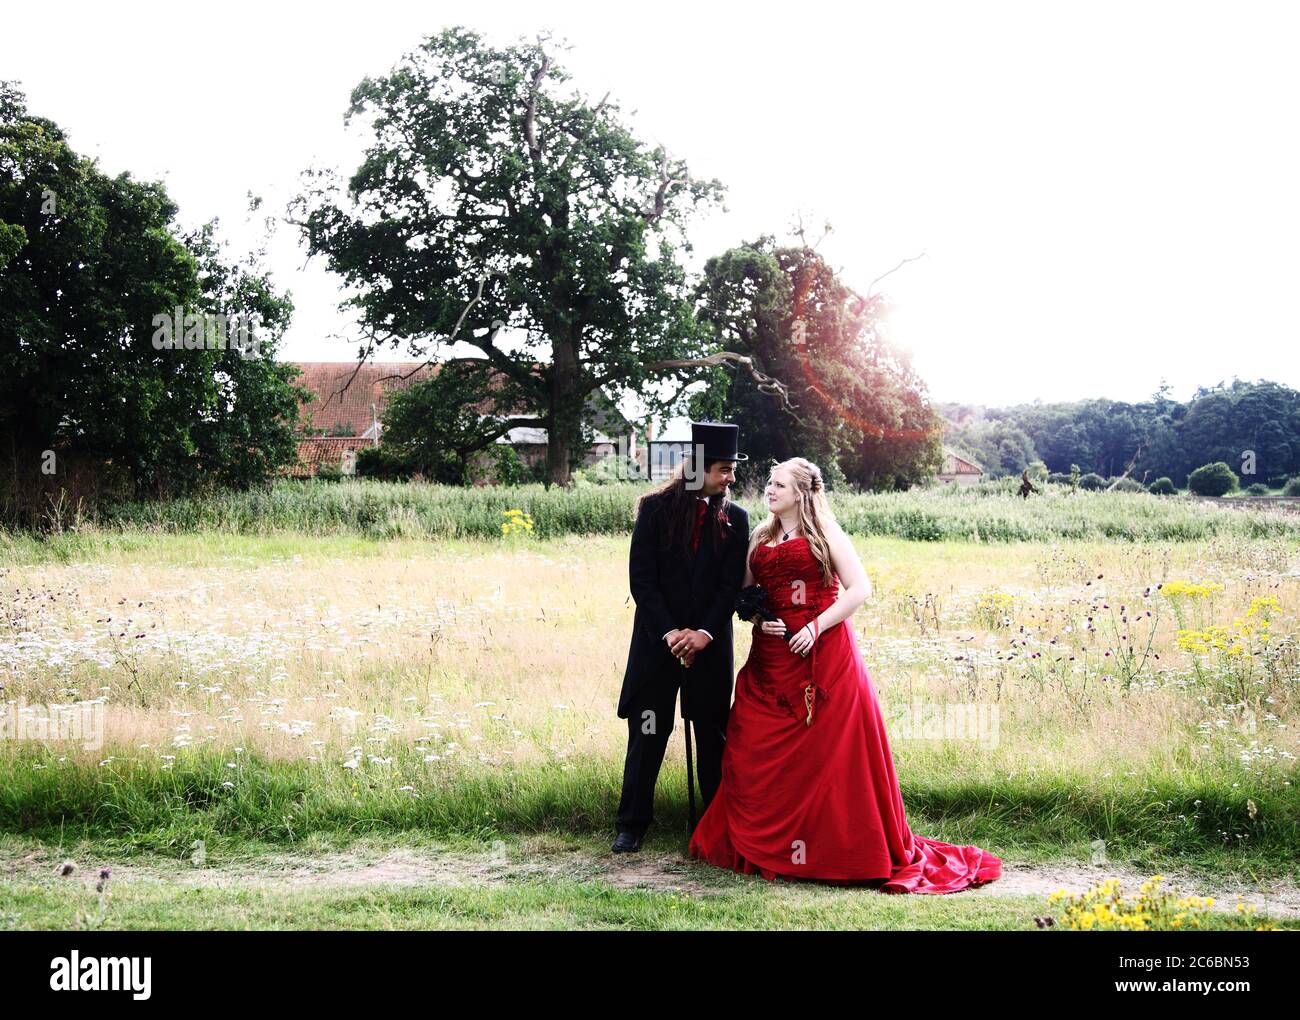 Groom thirties & bride twenties in goth wedding fashion with red dress, gothic top hat, tails & cane. Stock Photo